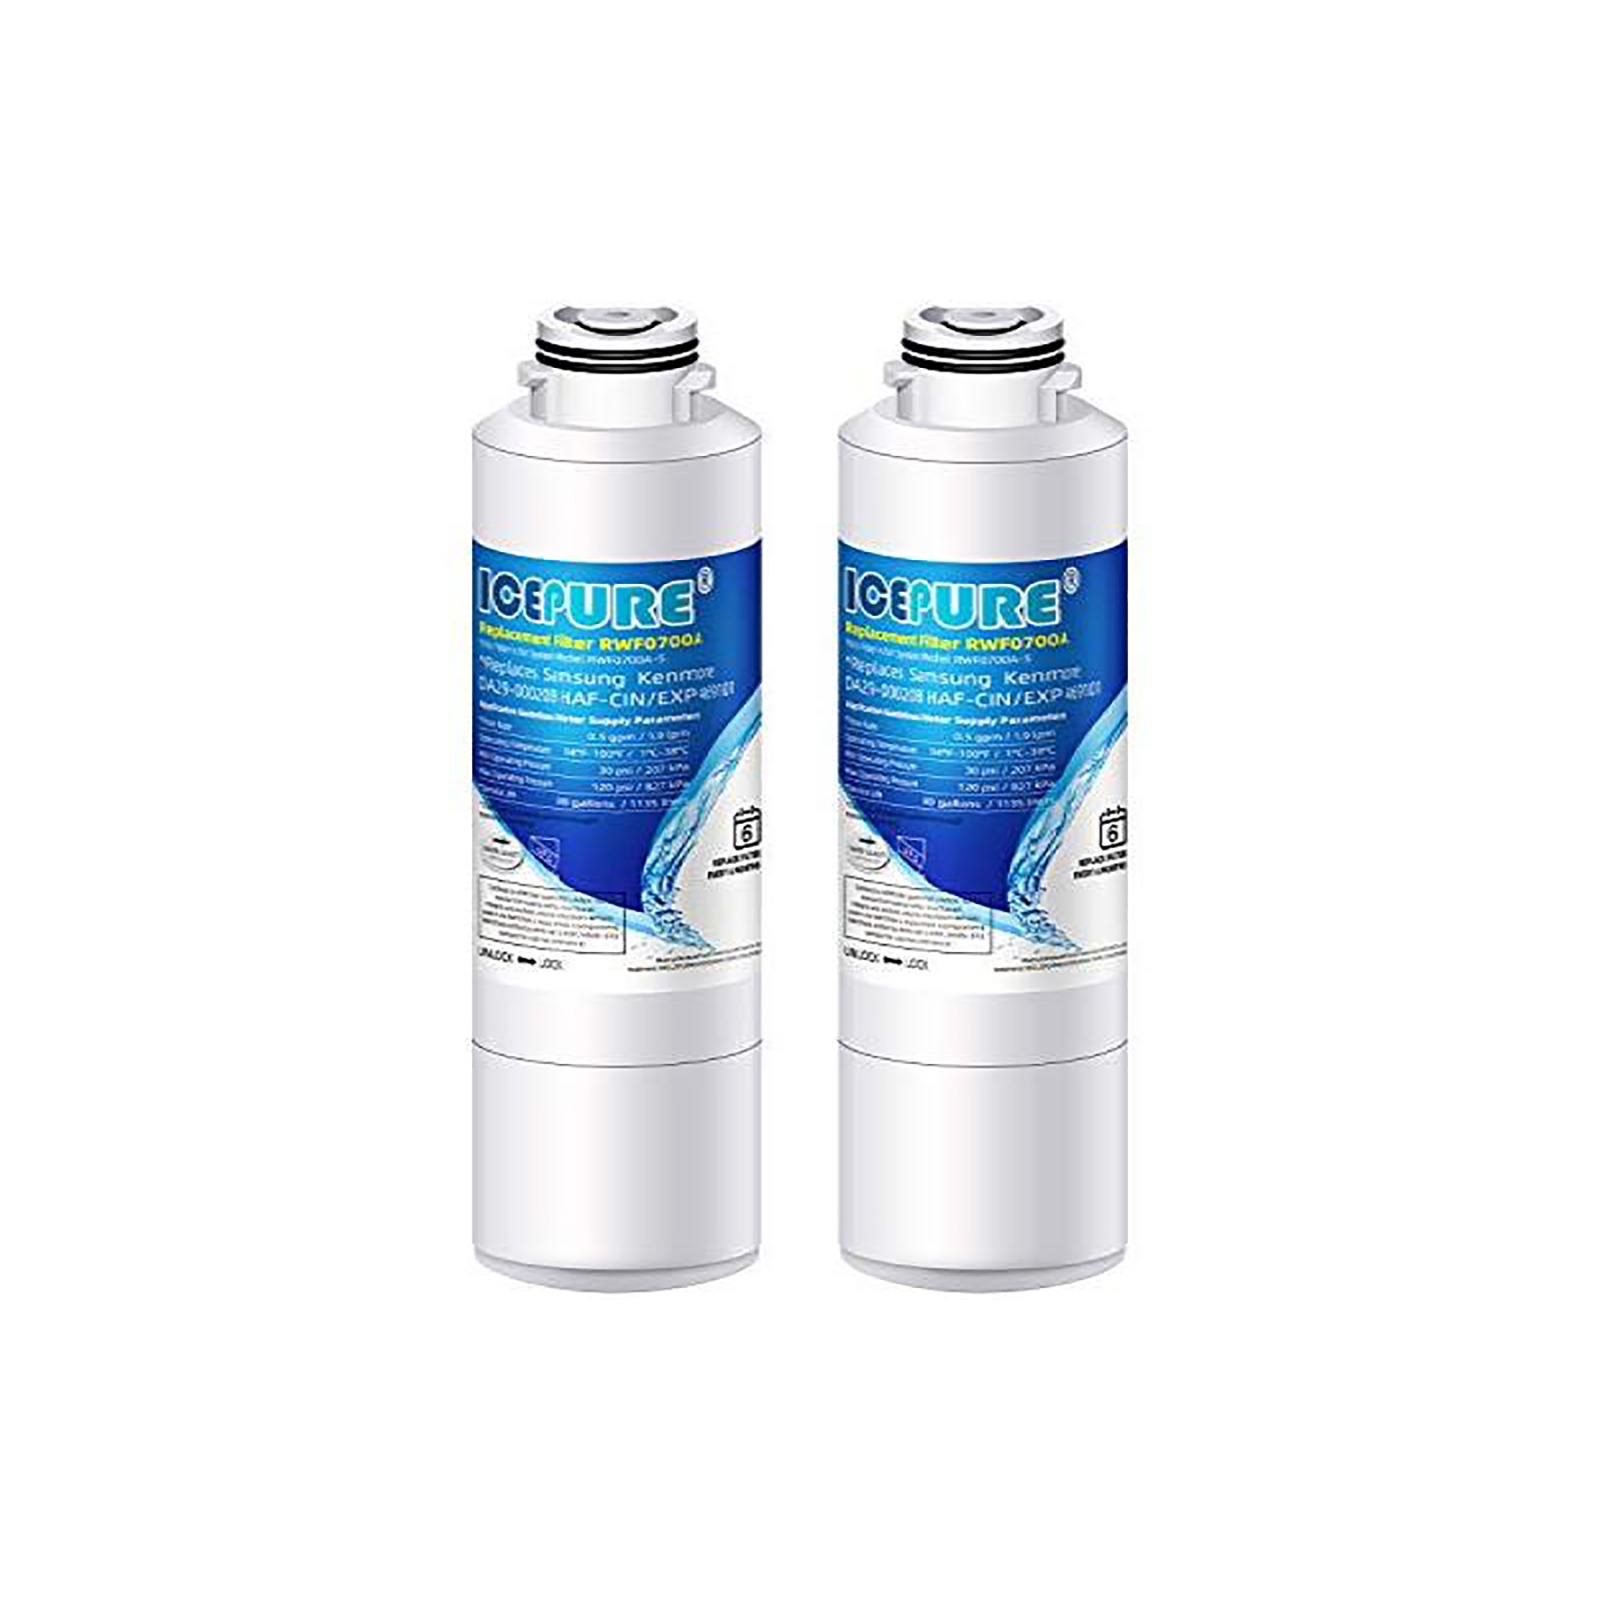 ICEPURE APLNSB00ZY5H5JK 2pc. Replacement Refrigerator Water Filter Set for Samsung